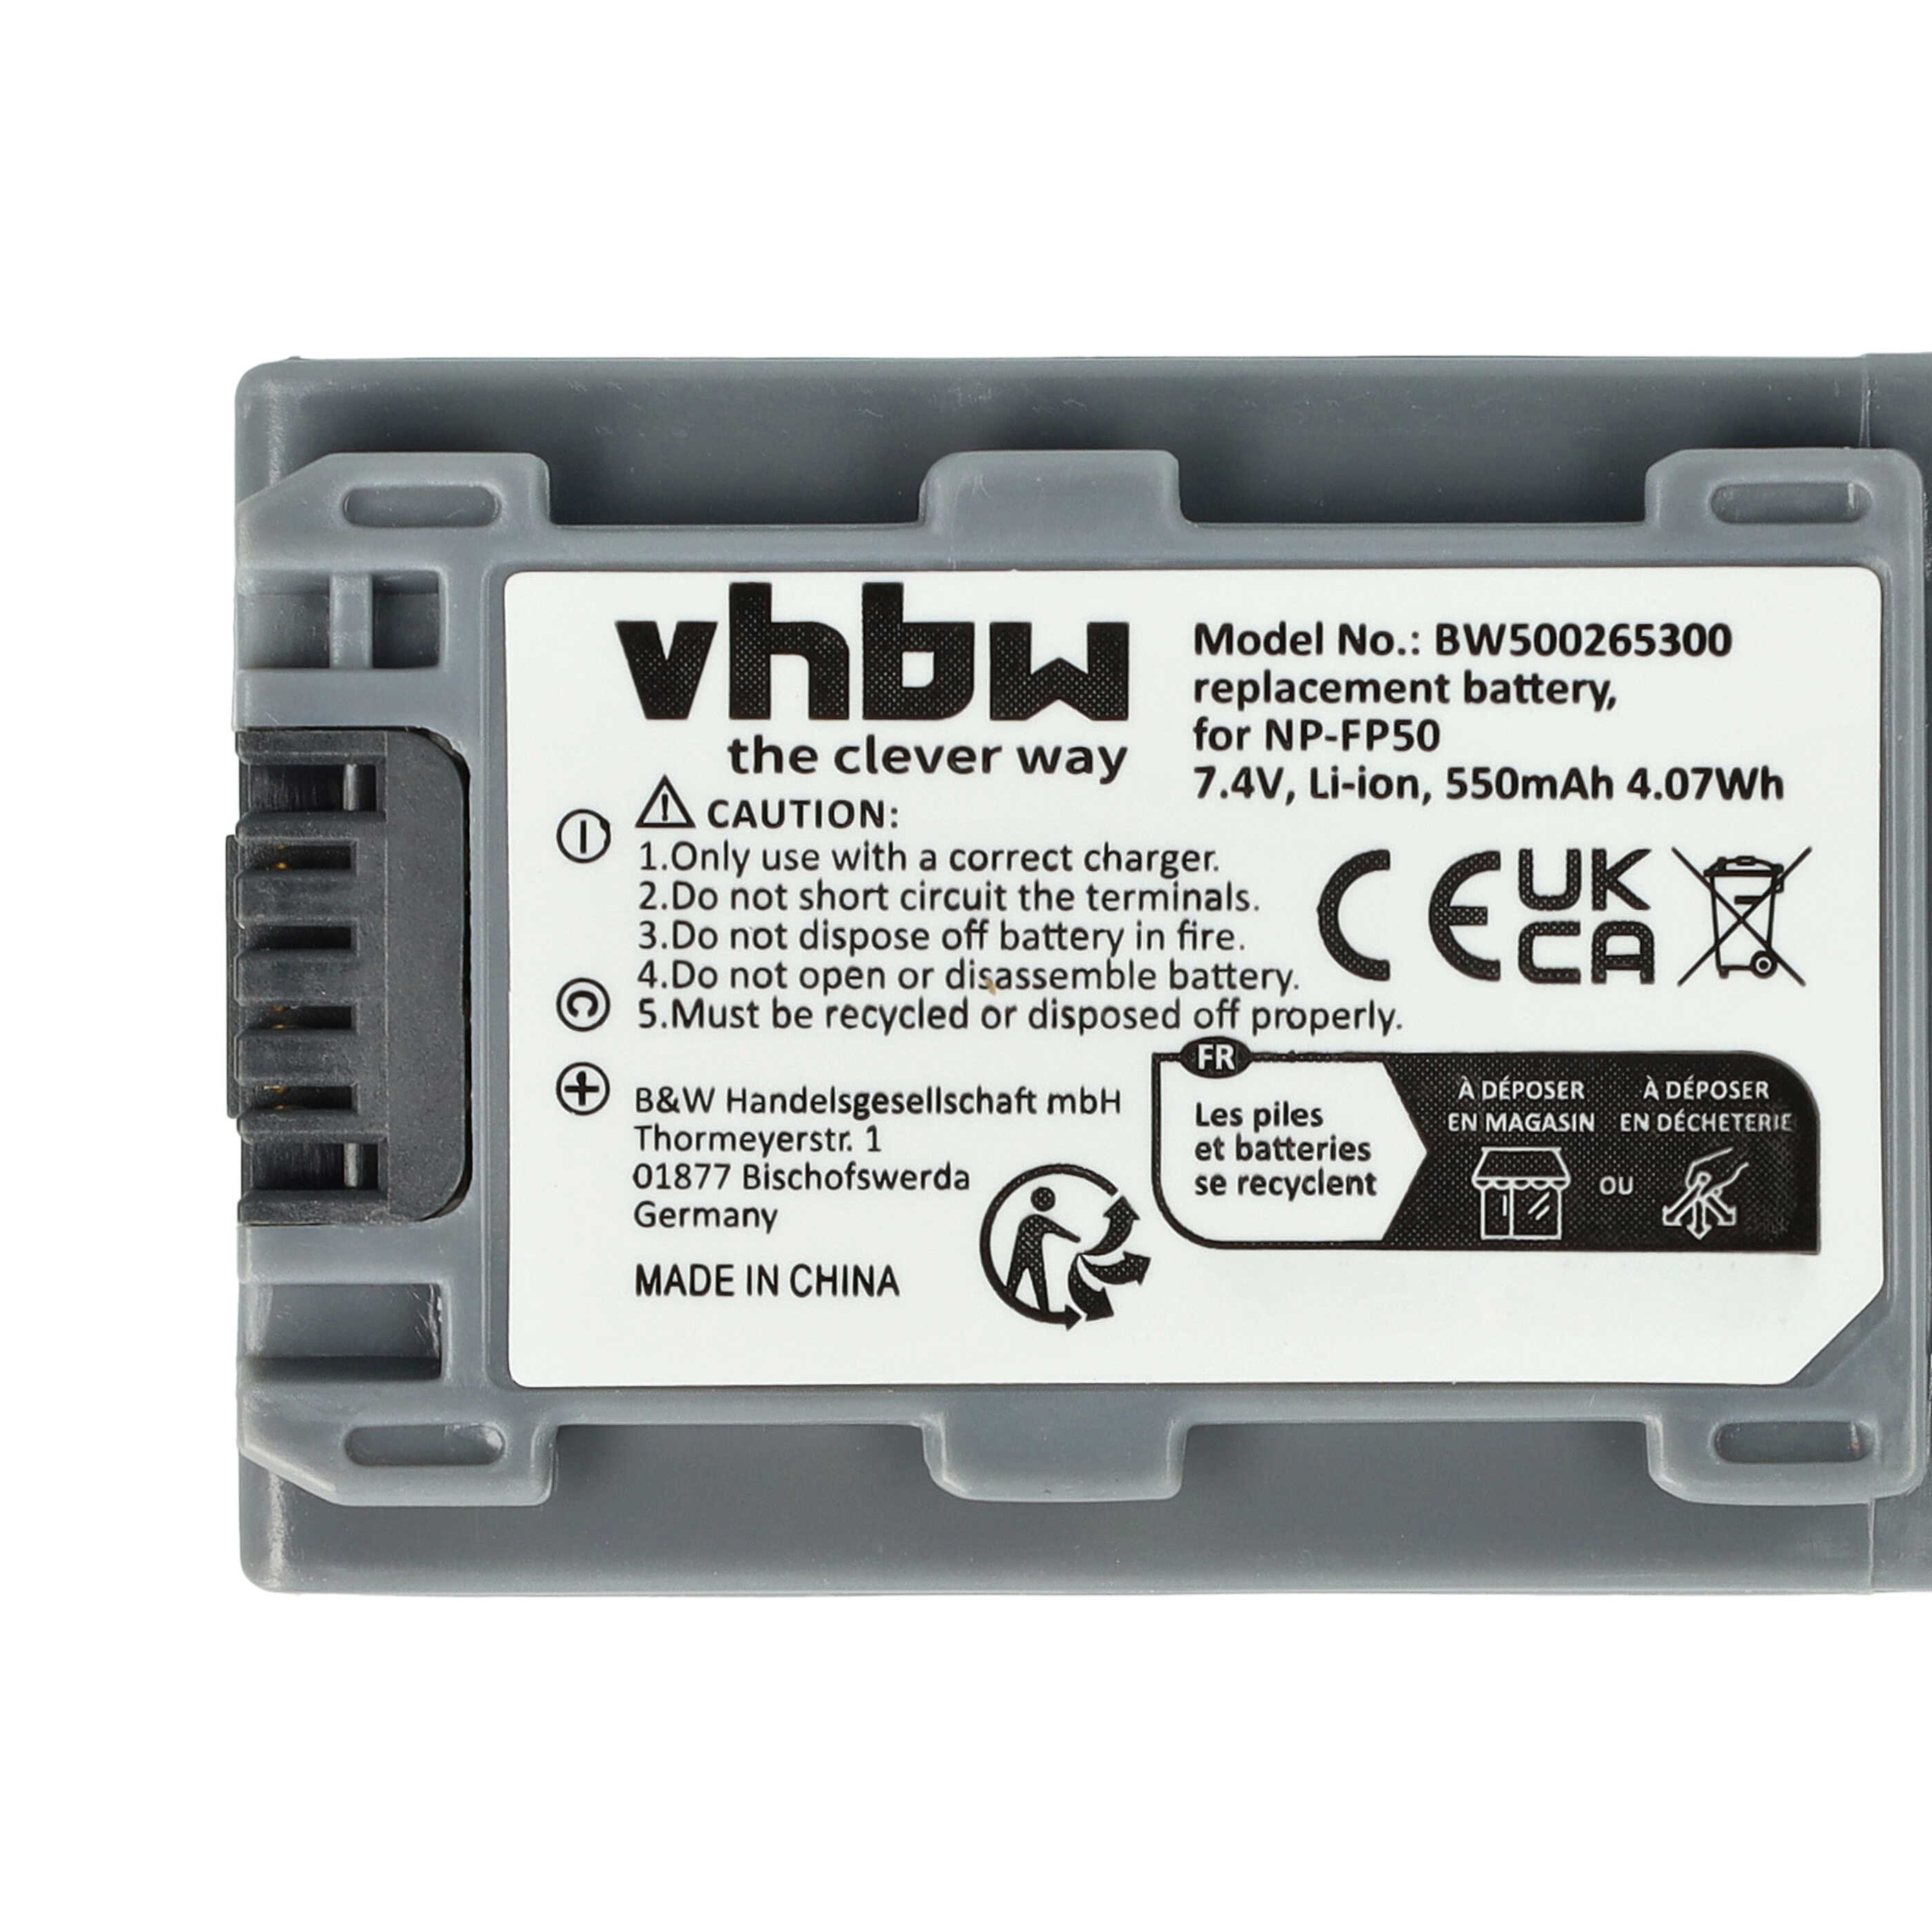 Videocamera Battery Replacement for Sony NP-FP50, NP-FP30, NP-FP60, NP-FP51, NP-FP70 - 600mAh 7.2V Li-Ion